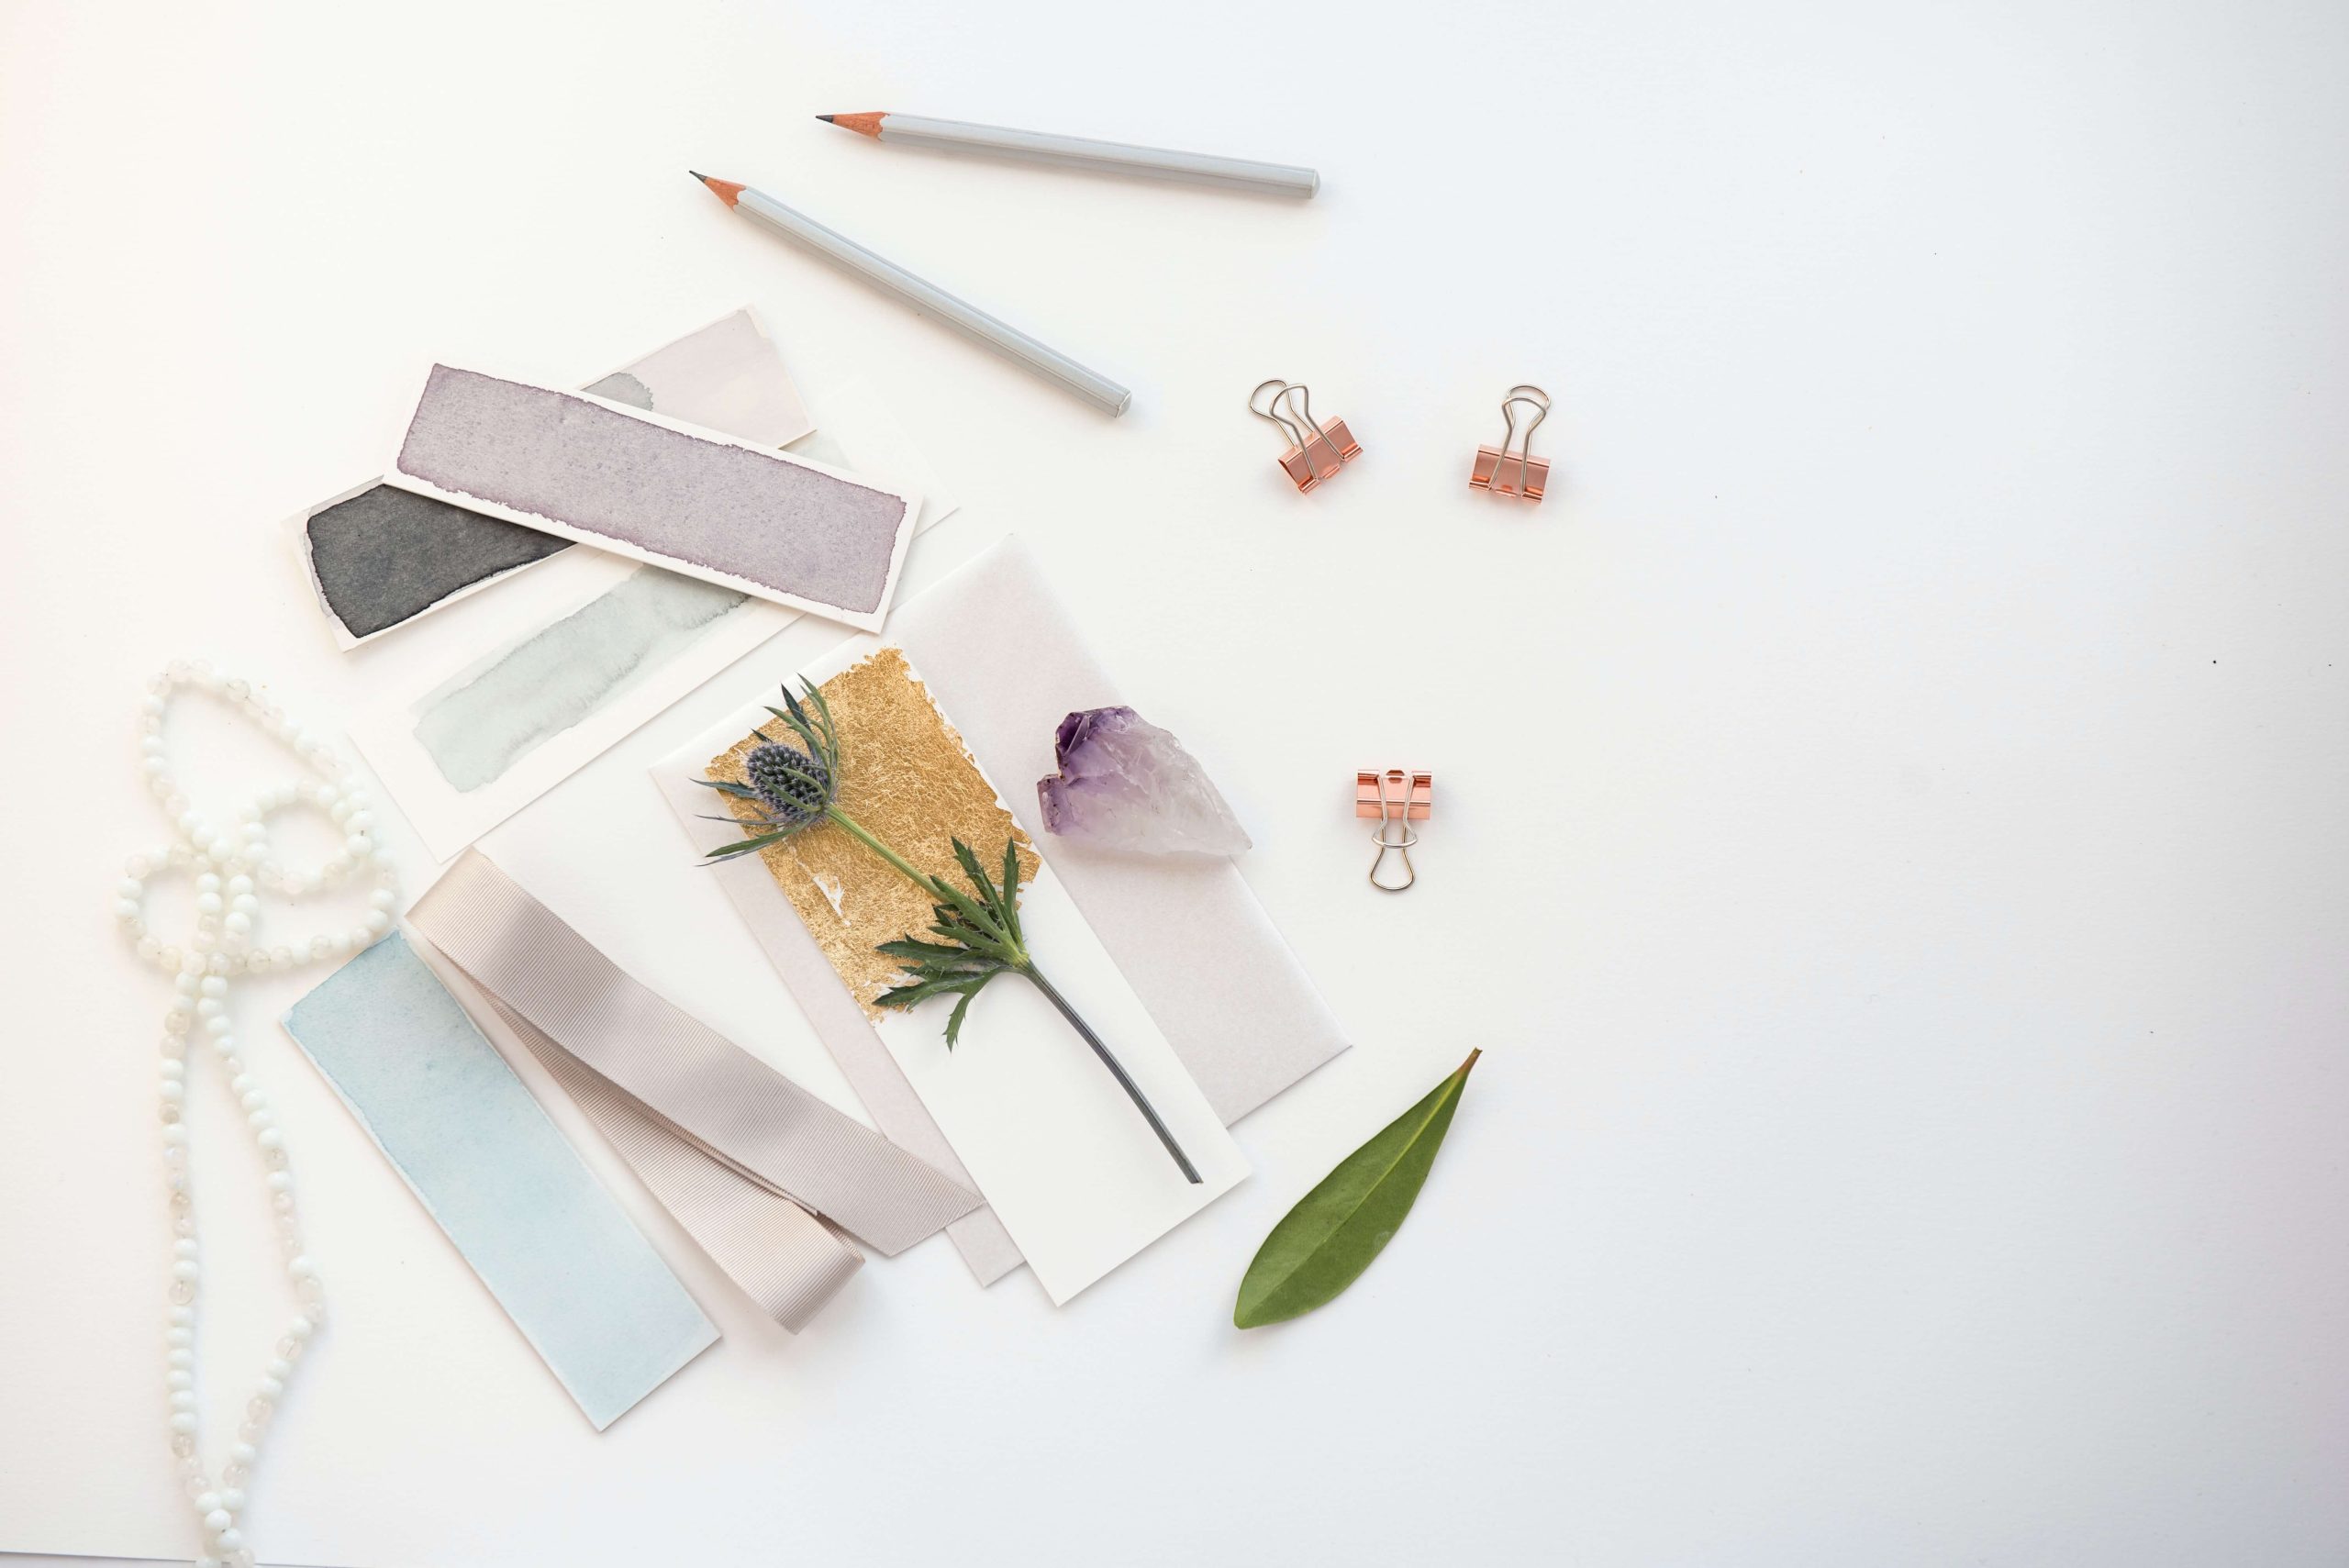 Unleash Your Imagination How to Create a Mood Board thumbnail how to create a mood board - Unleash Your Imagination How to Create a Mood Board thumbnail scaled - Unleash Your Imagination: How to Create a Mood Board